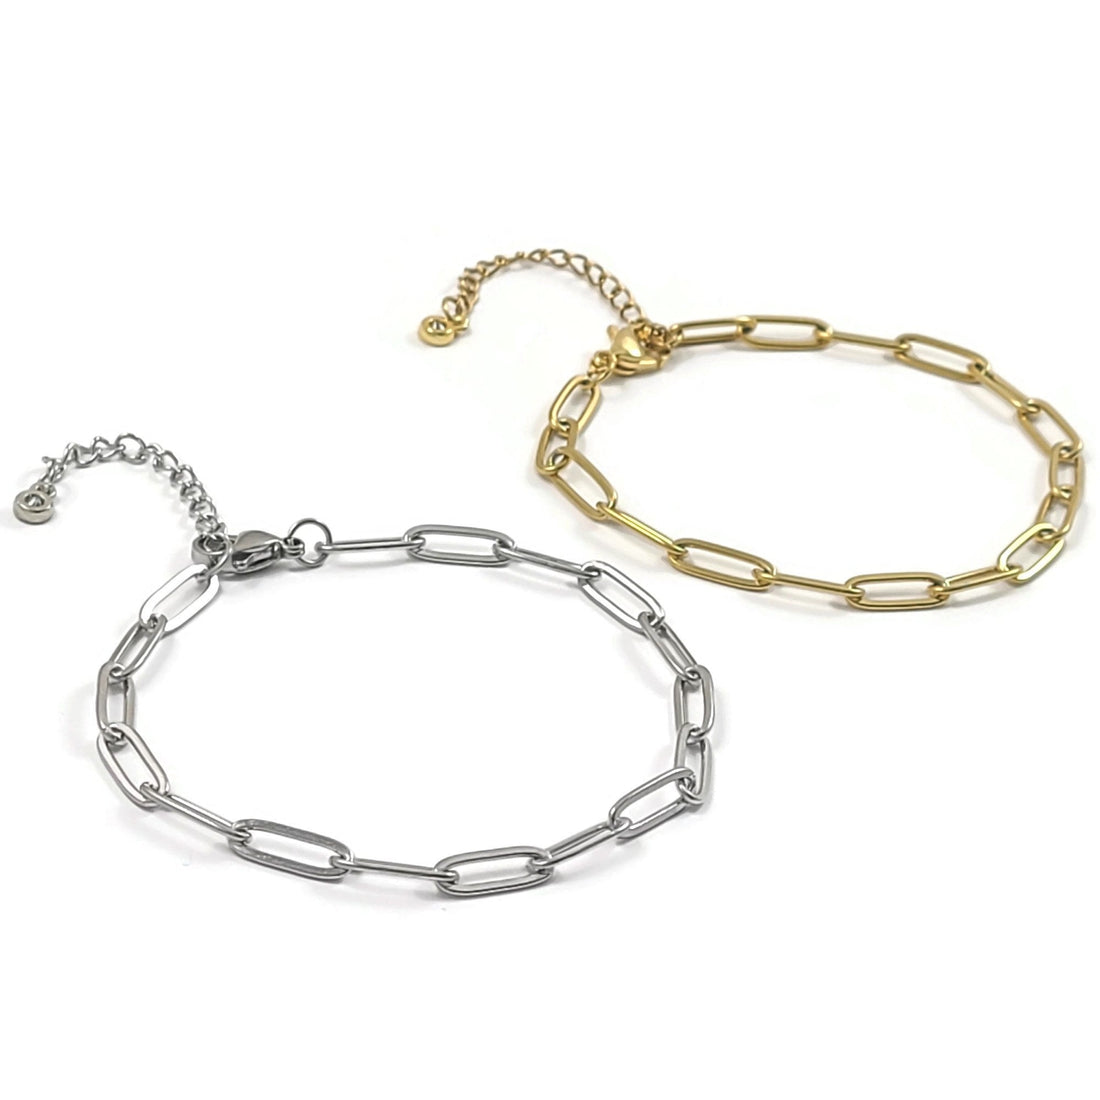 Adjustable paperclip chain bracelet, Gold and silver stainless steel, Bulk lot option for jewelry making